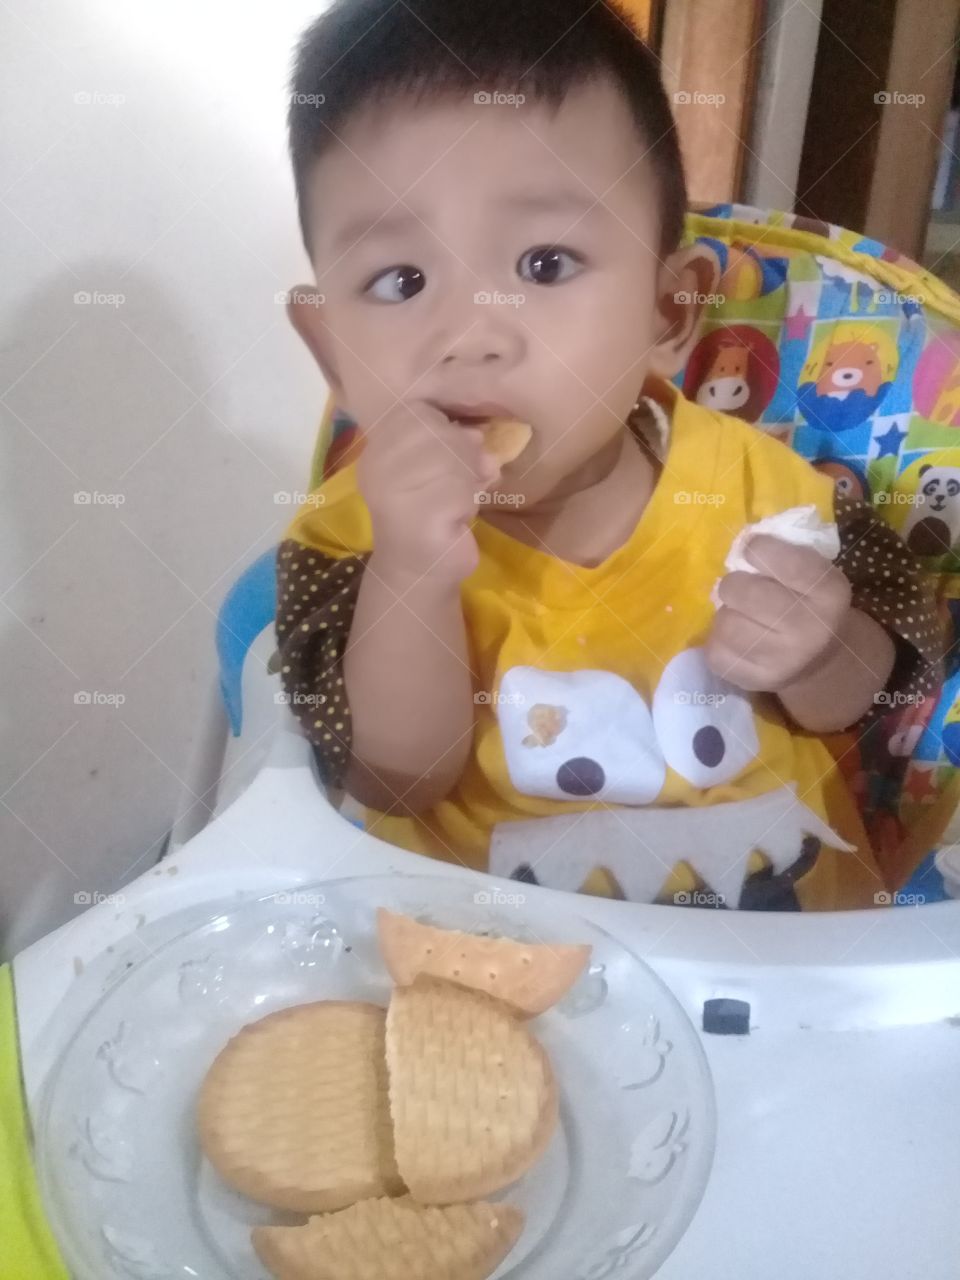 a baby eating biscuit